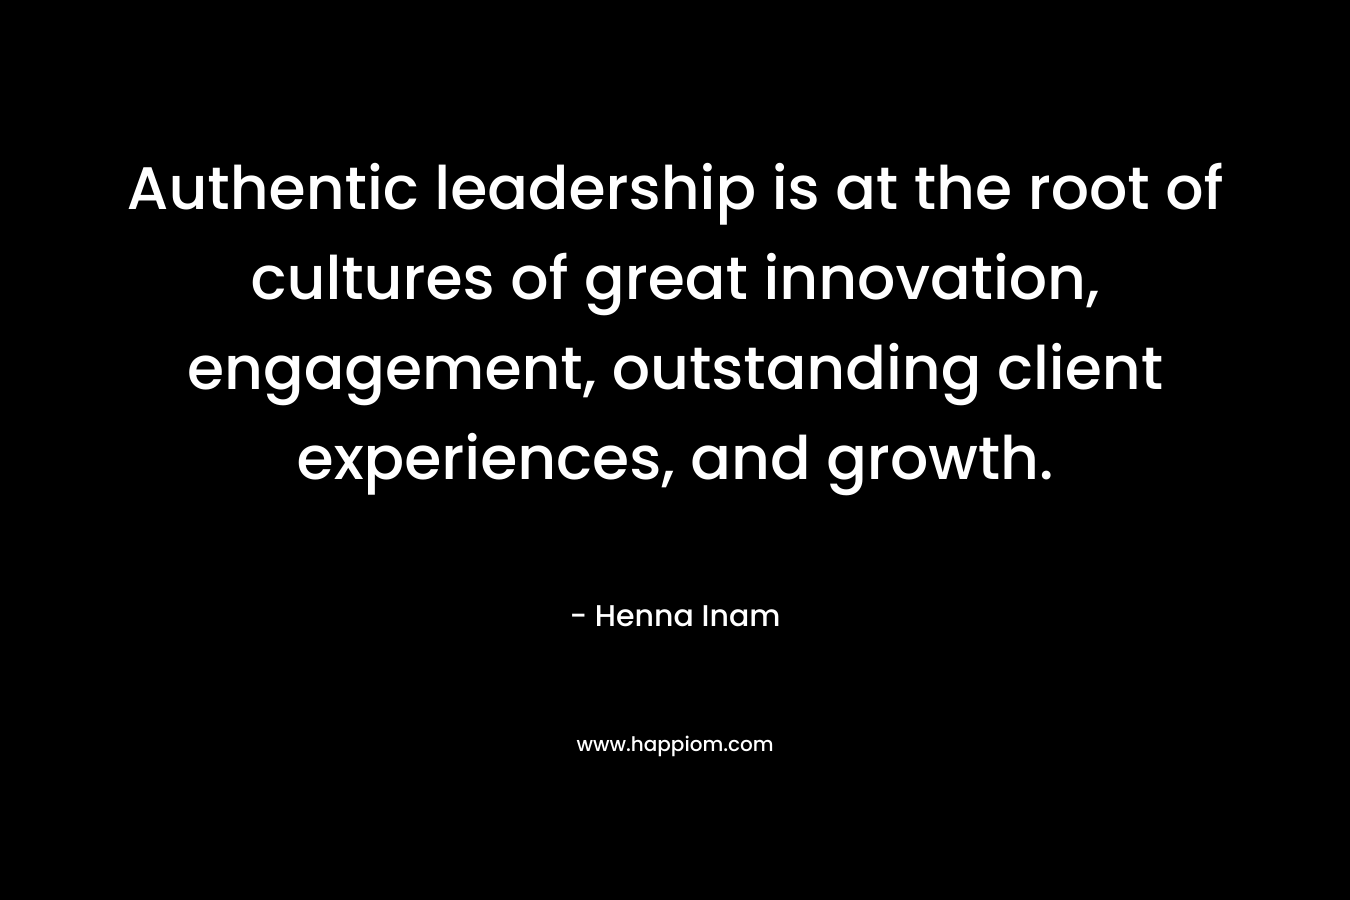 Authentic leadership is at the root of cultures of great innovation, engagement, outstanding client experiences, and growth. – Henna Inam